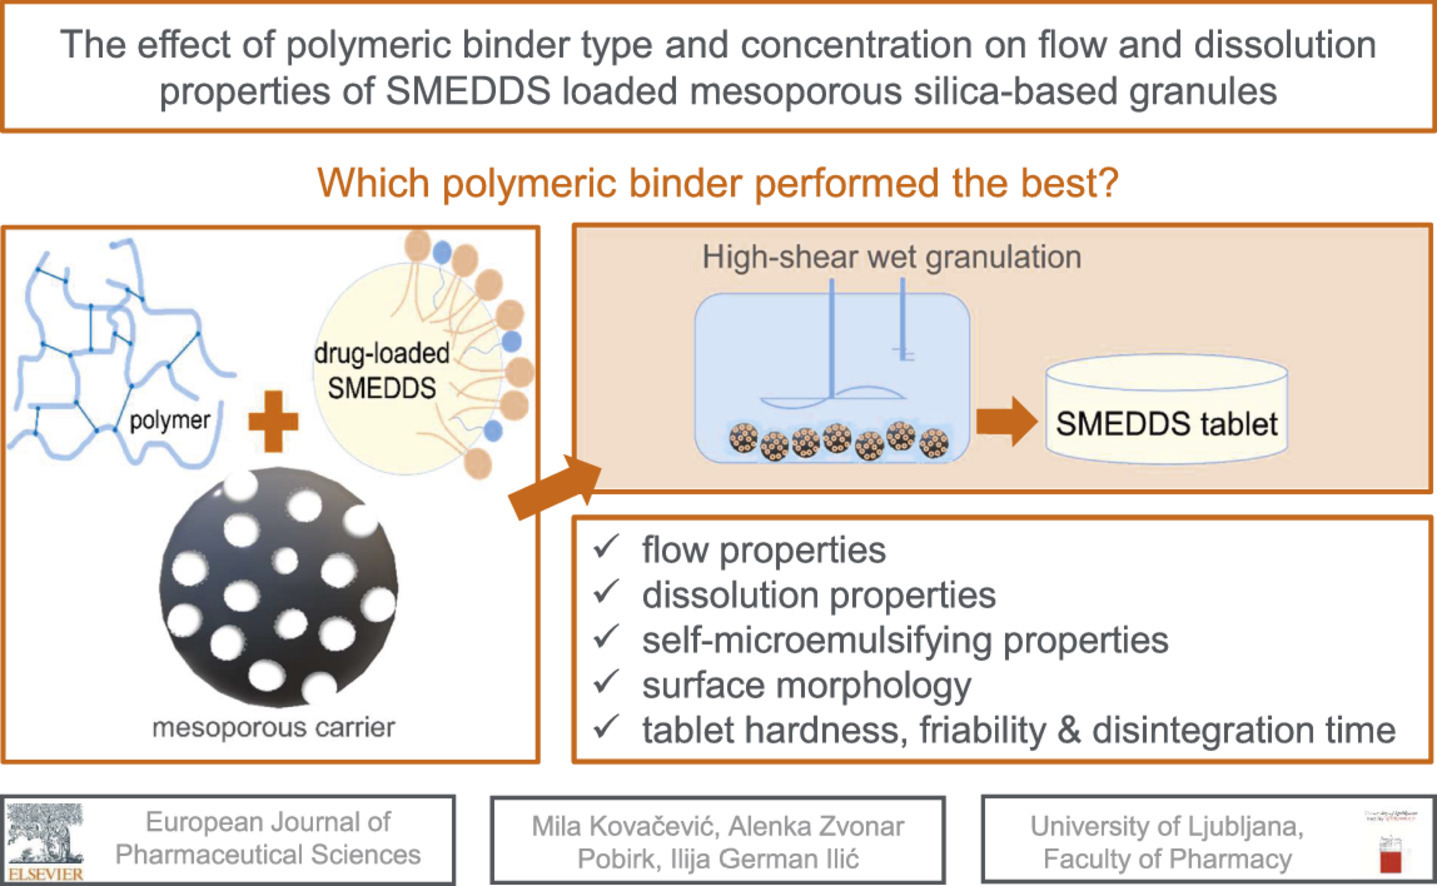 The effect of polymeric binder type and concentration on flow and dissolution properties of SMEDDS loaded mesoporous silica-based granules